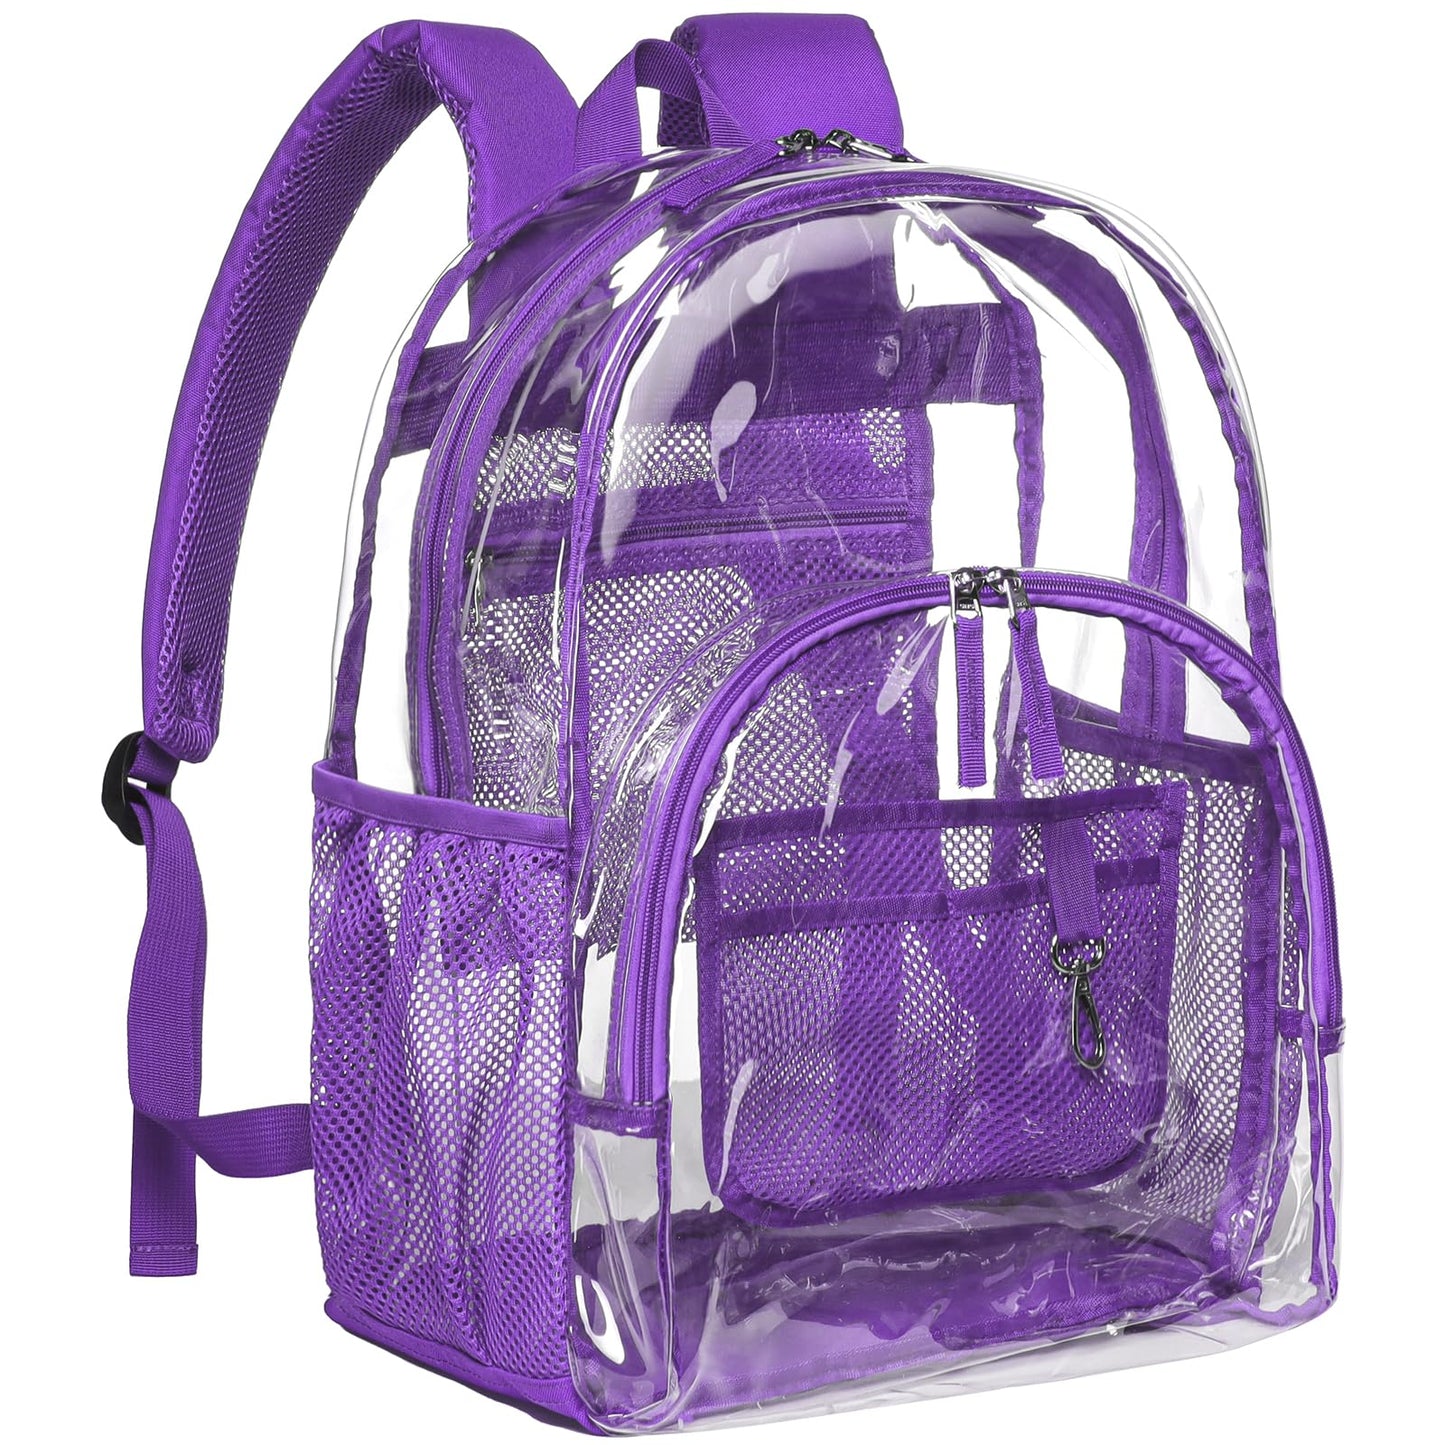 PACKISM Heavy Duty Clear School Backpack,X-Large